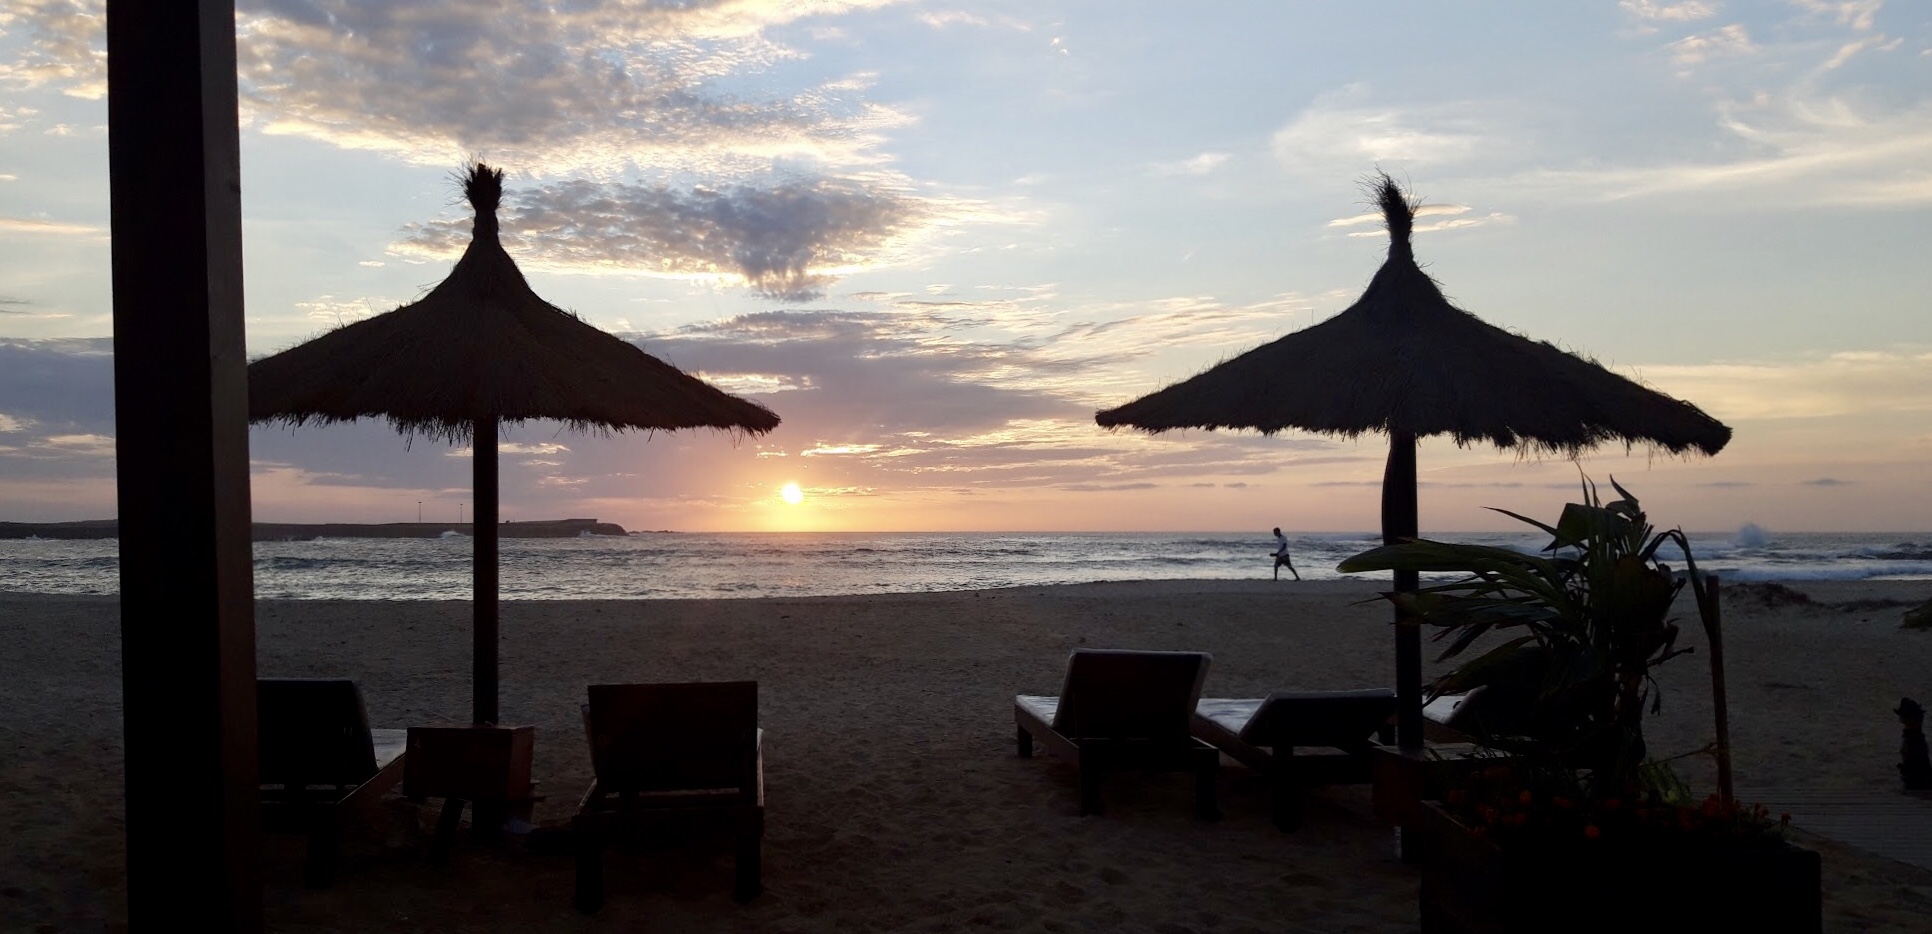 Perfect beaches is one the quick facts about Cape Verde